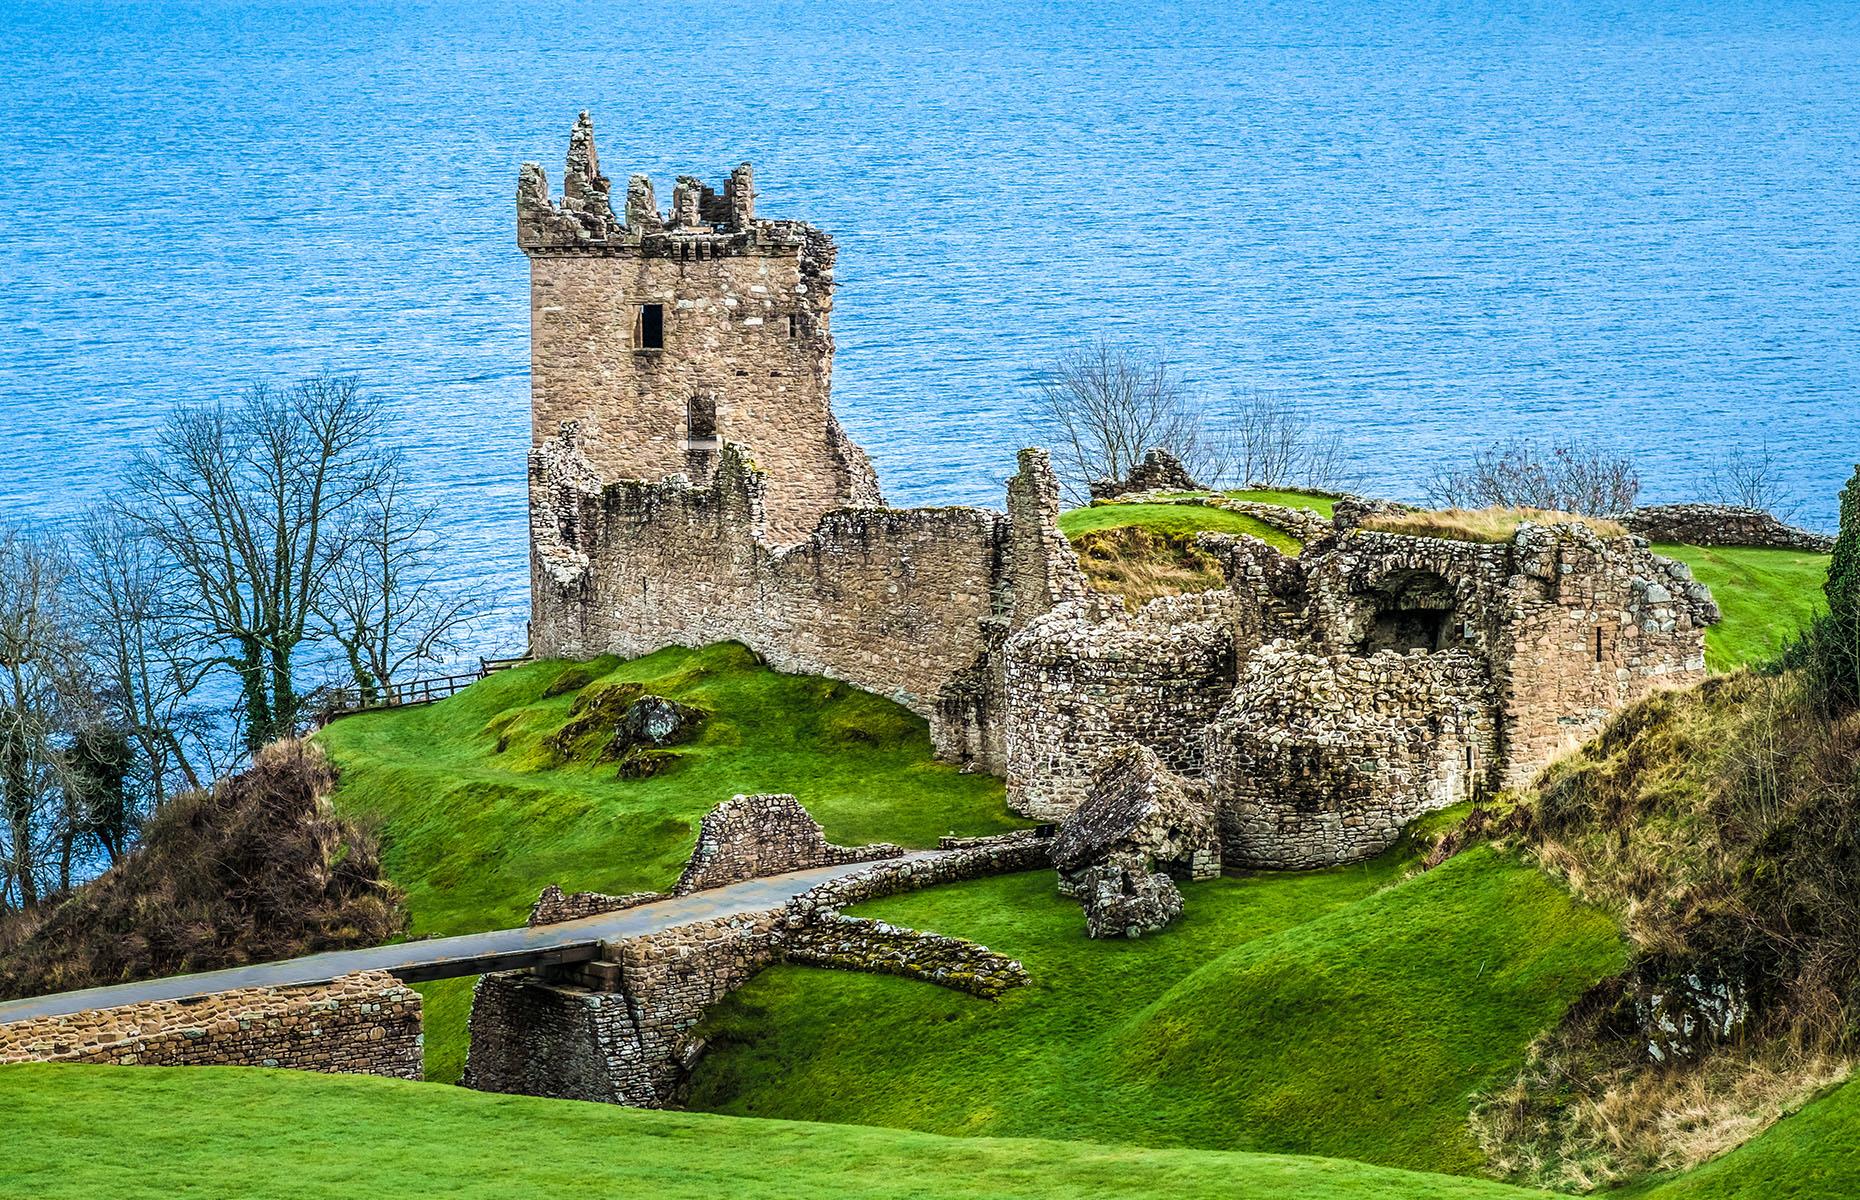 <p>They may be on the well-trodden tourist trail, but Urquhart Castle and Loch Ness deserve a visit. Favourite haunts for Inverness locals include the Ness Islands, connected by a series of pretty suspension bridges in the middle of the river.</p>  <p>Afterwards, head to Leakey’s vast second-hand bookshop, then the Milk Bar for handmade Highland ice cream.</p>